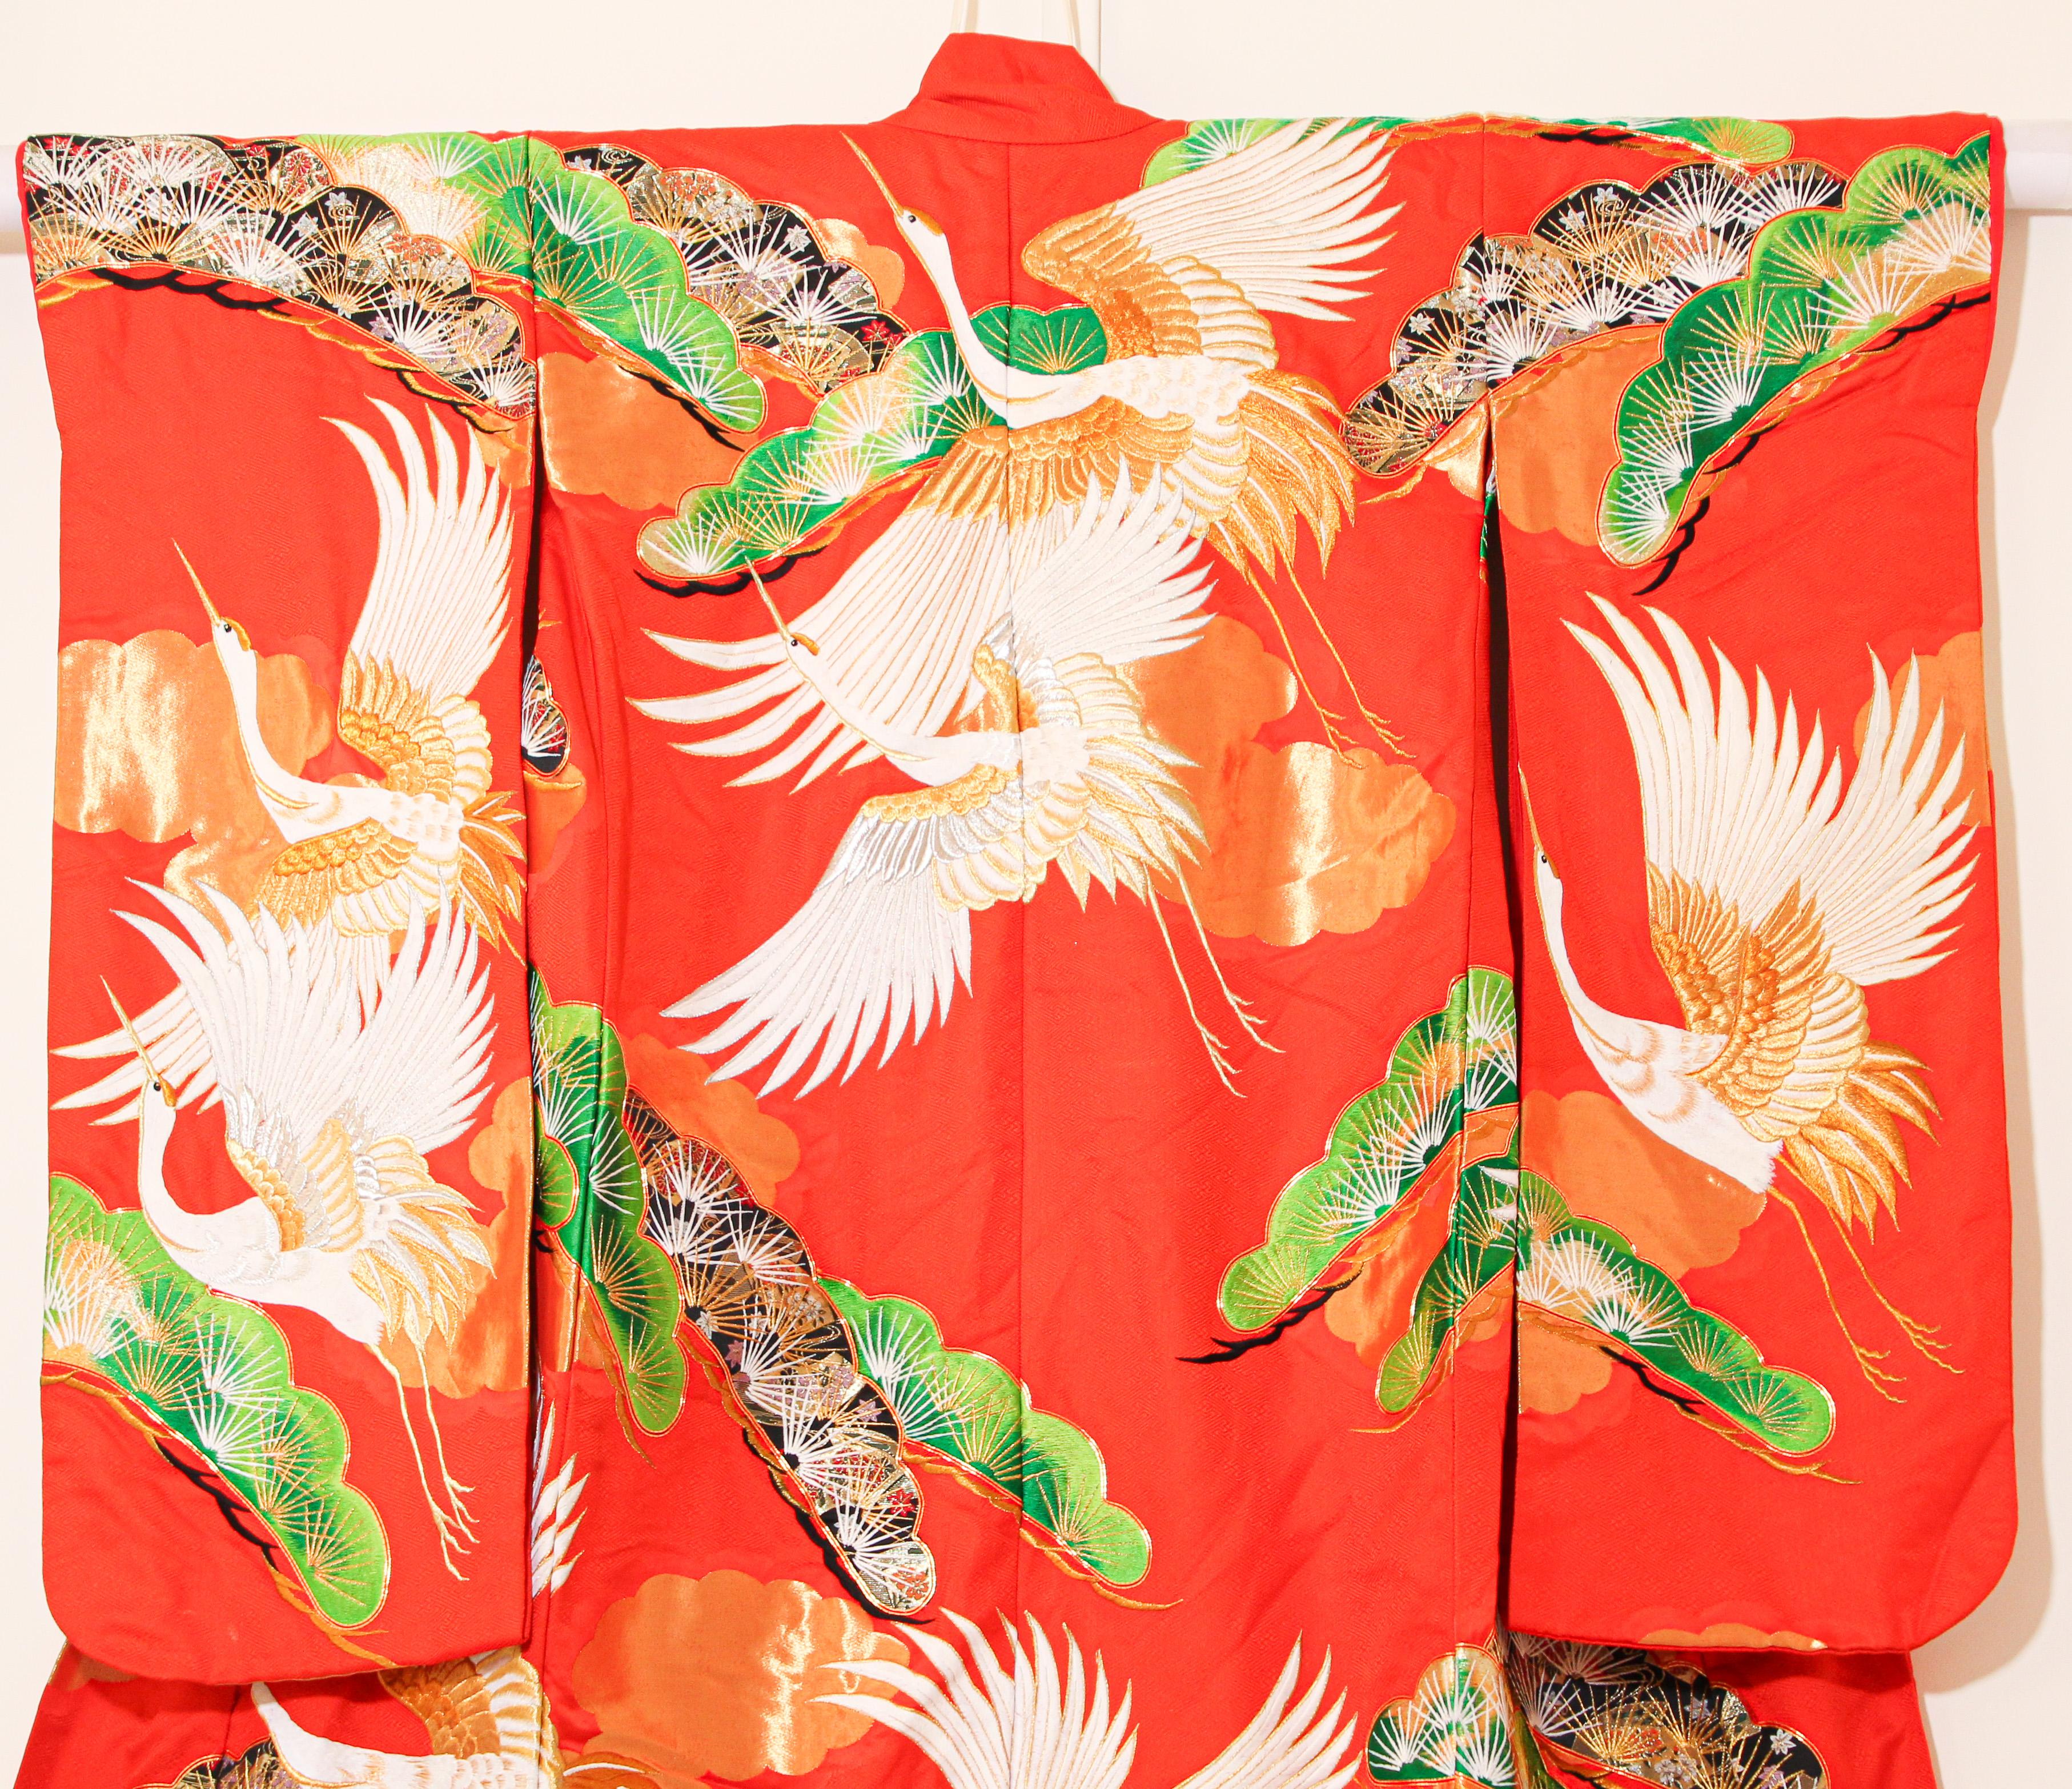 Vintage Red Brocade with Flying Cranes Japanese Ceremonial Kimono 7